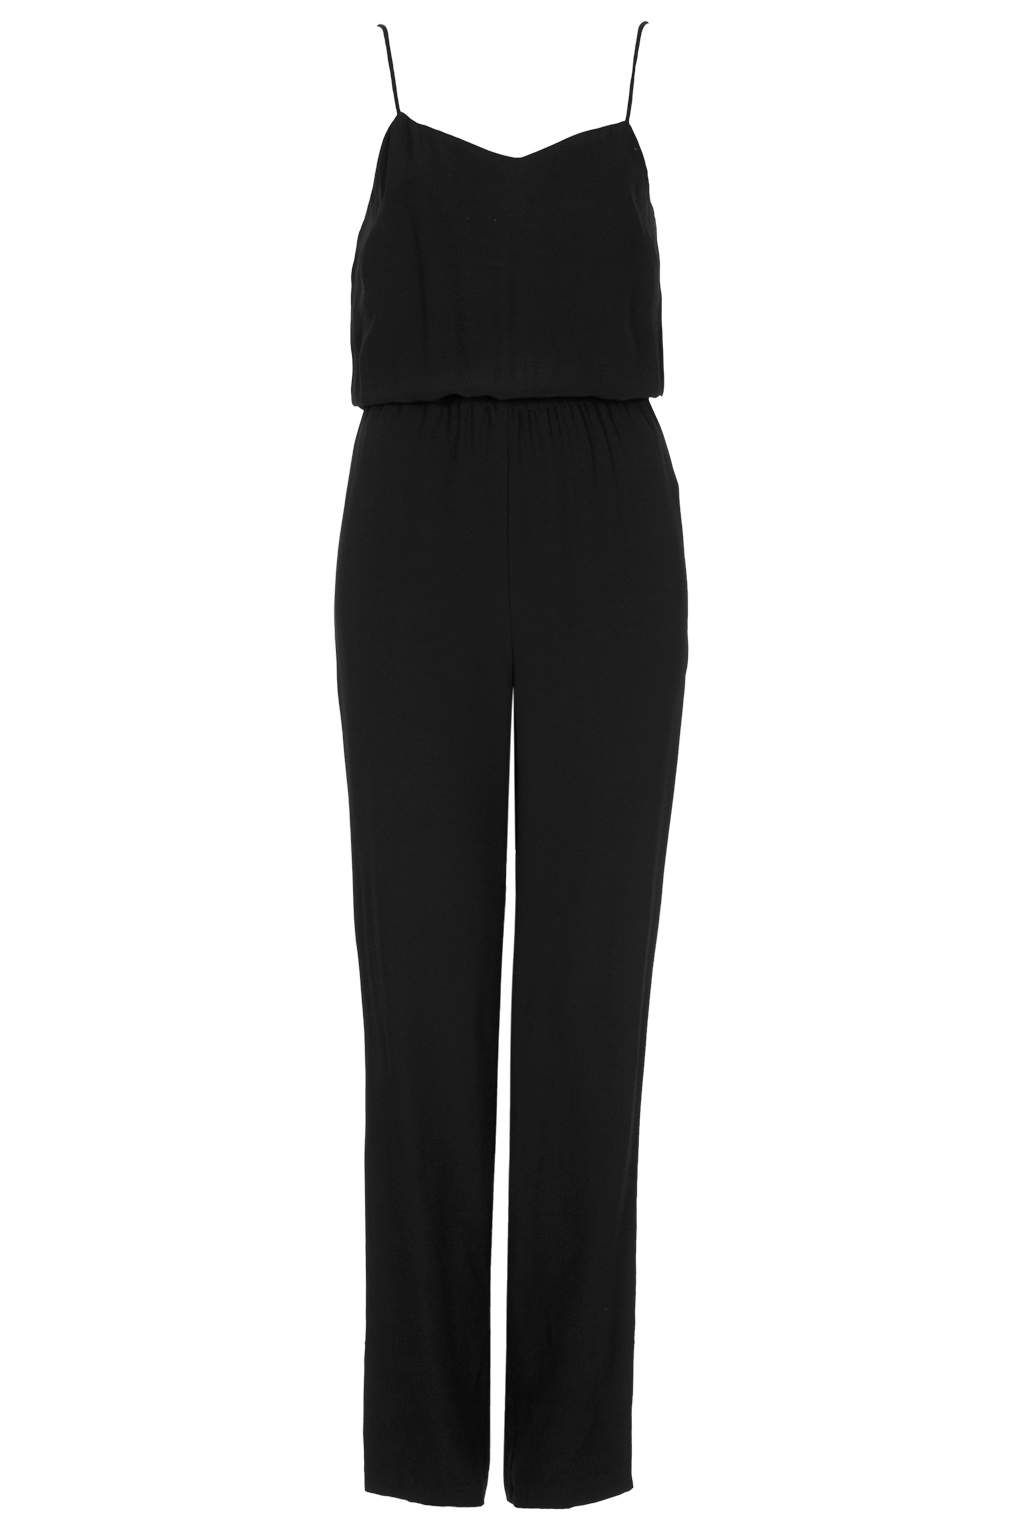 Lyst - Topshop Tall Satin Strappy Jumpsuit in Black